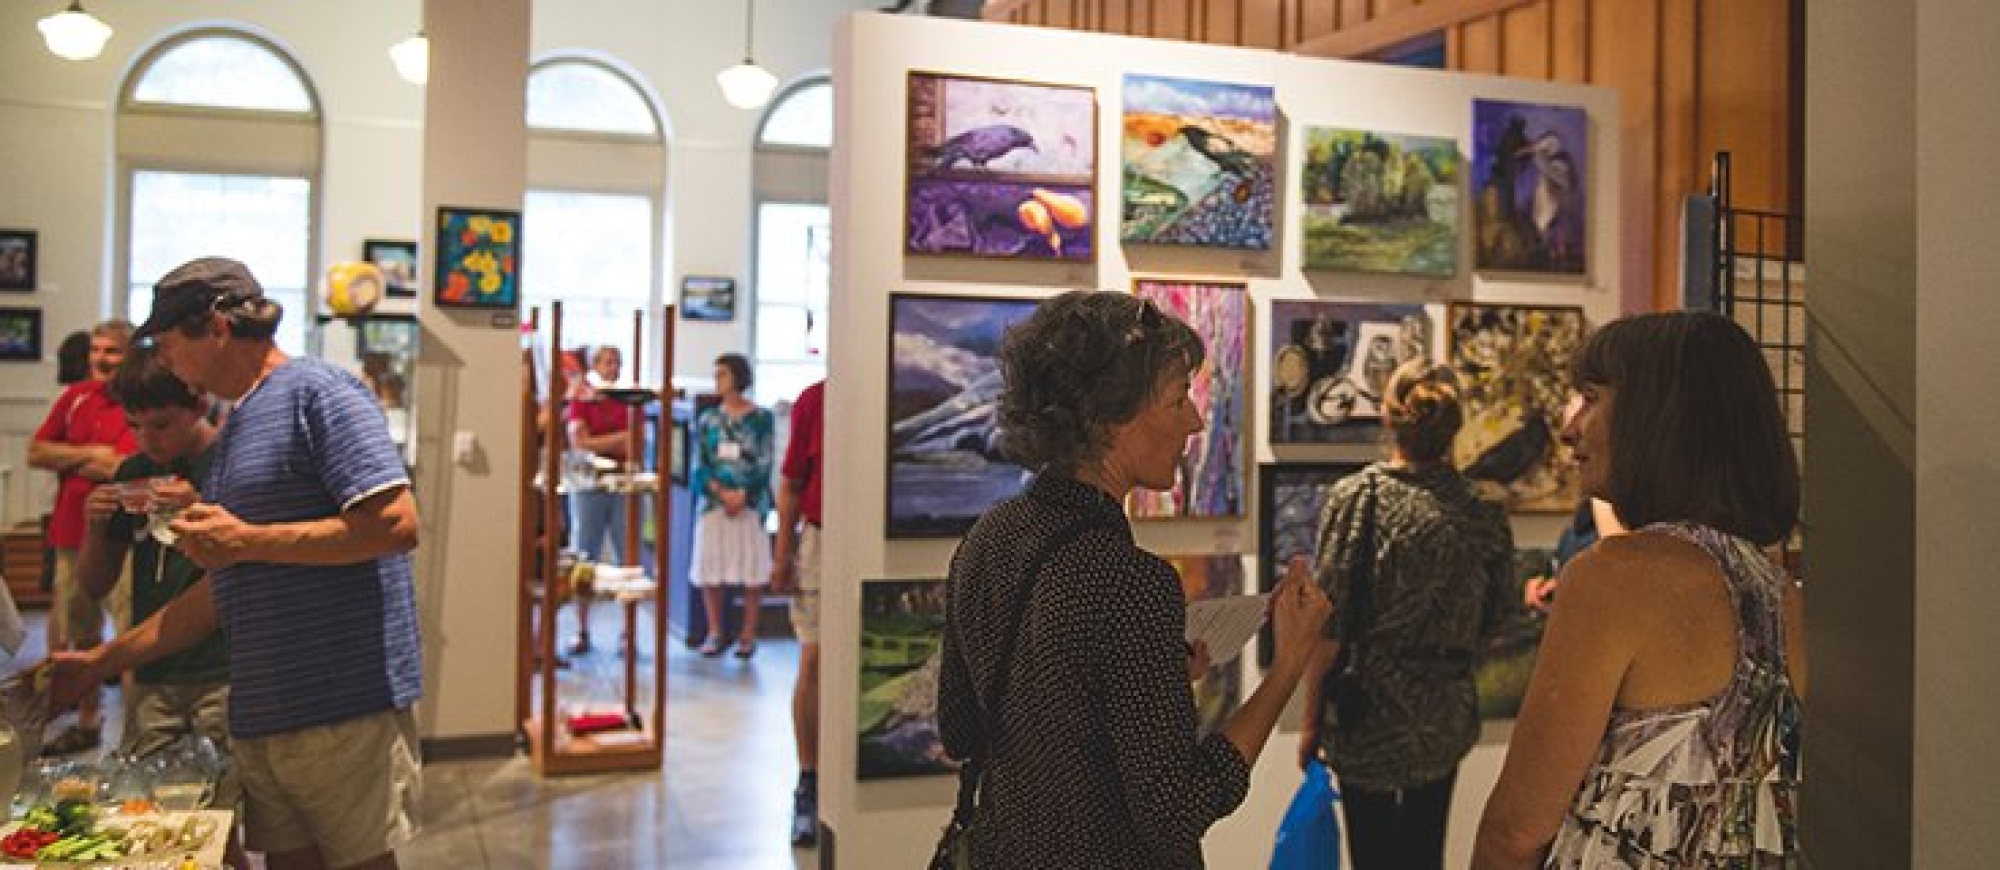 People looking at Art in Touchstones Museum, Nelson during Artwalk 2016. 